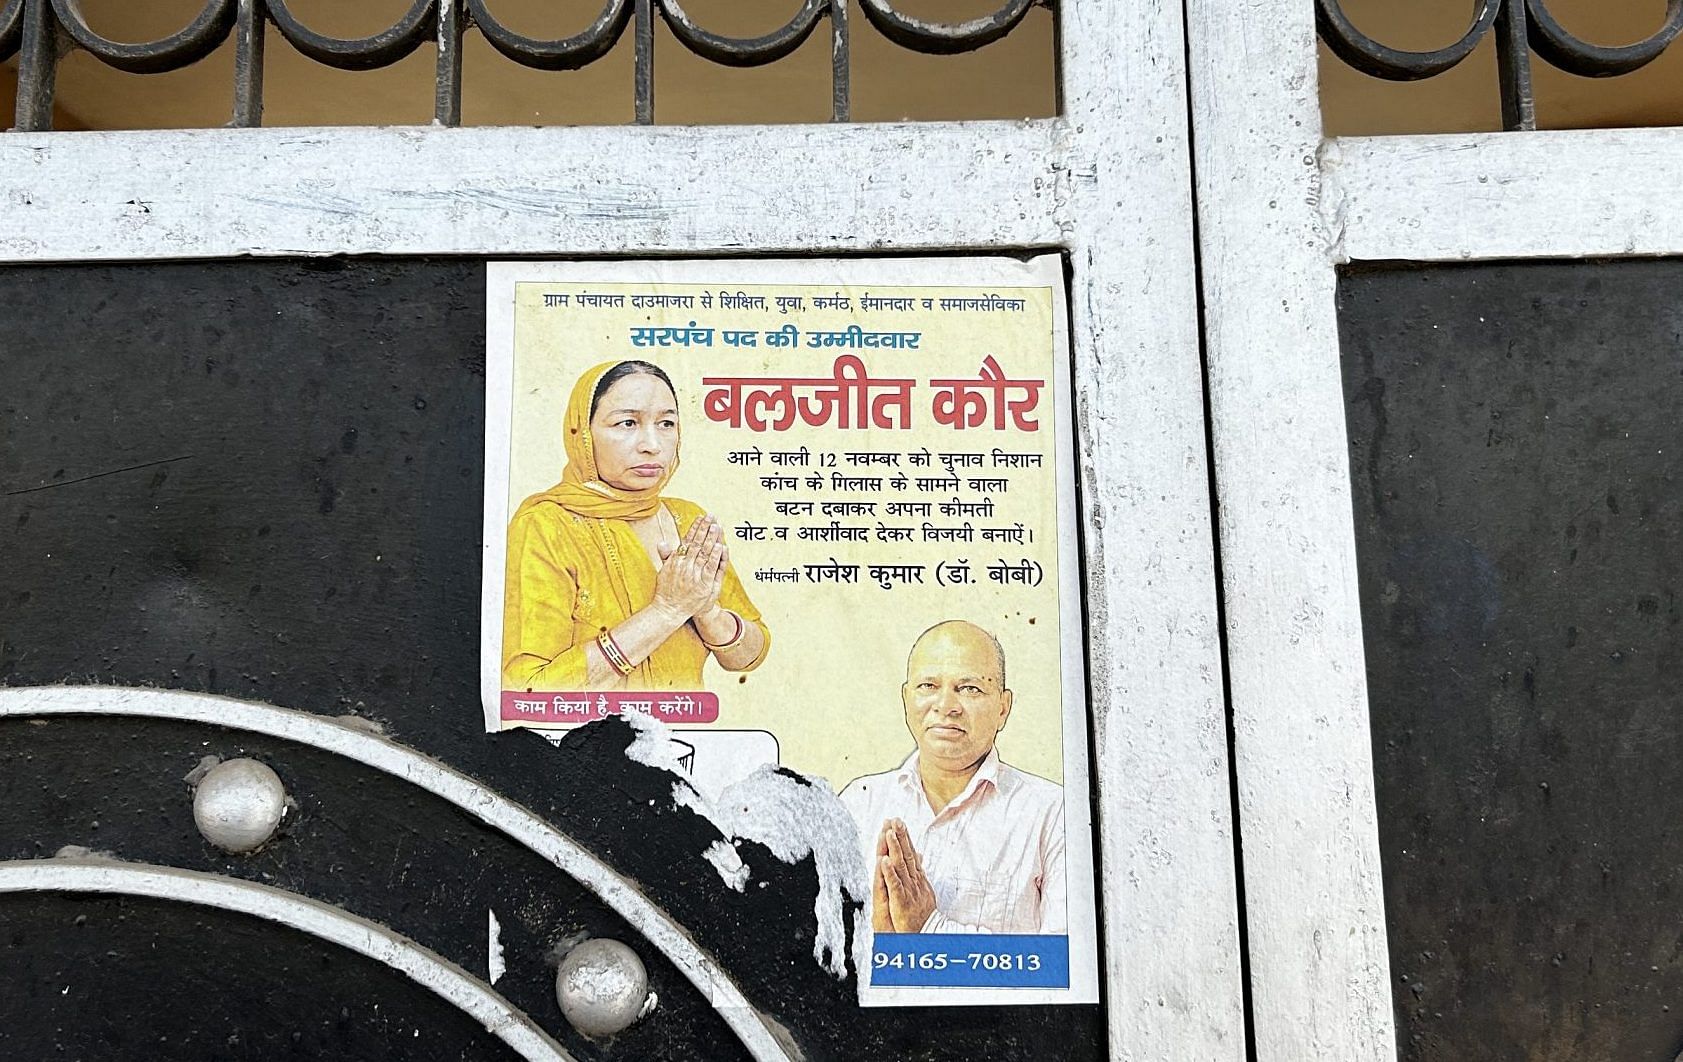 Poster of Baljeet Kaur from campaigning as the newly elected Mukhiya in Karnal district.  She also opposes the new e-tender policy.  Jyoti Yadav